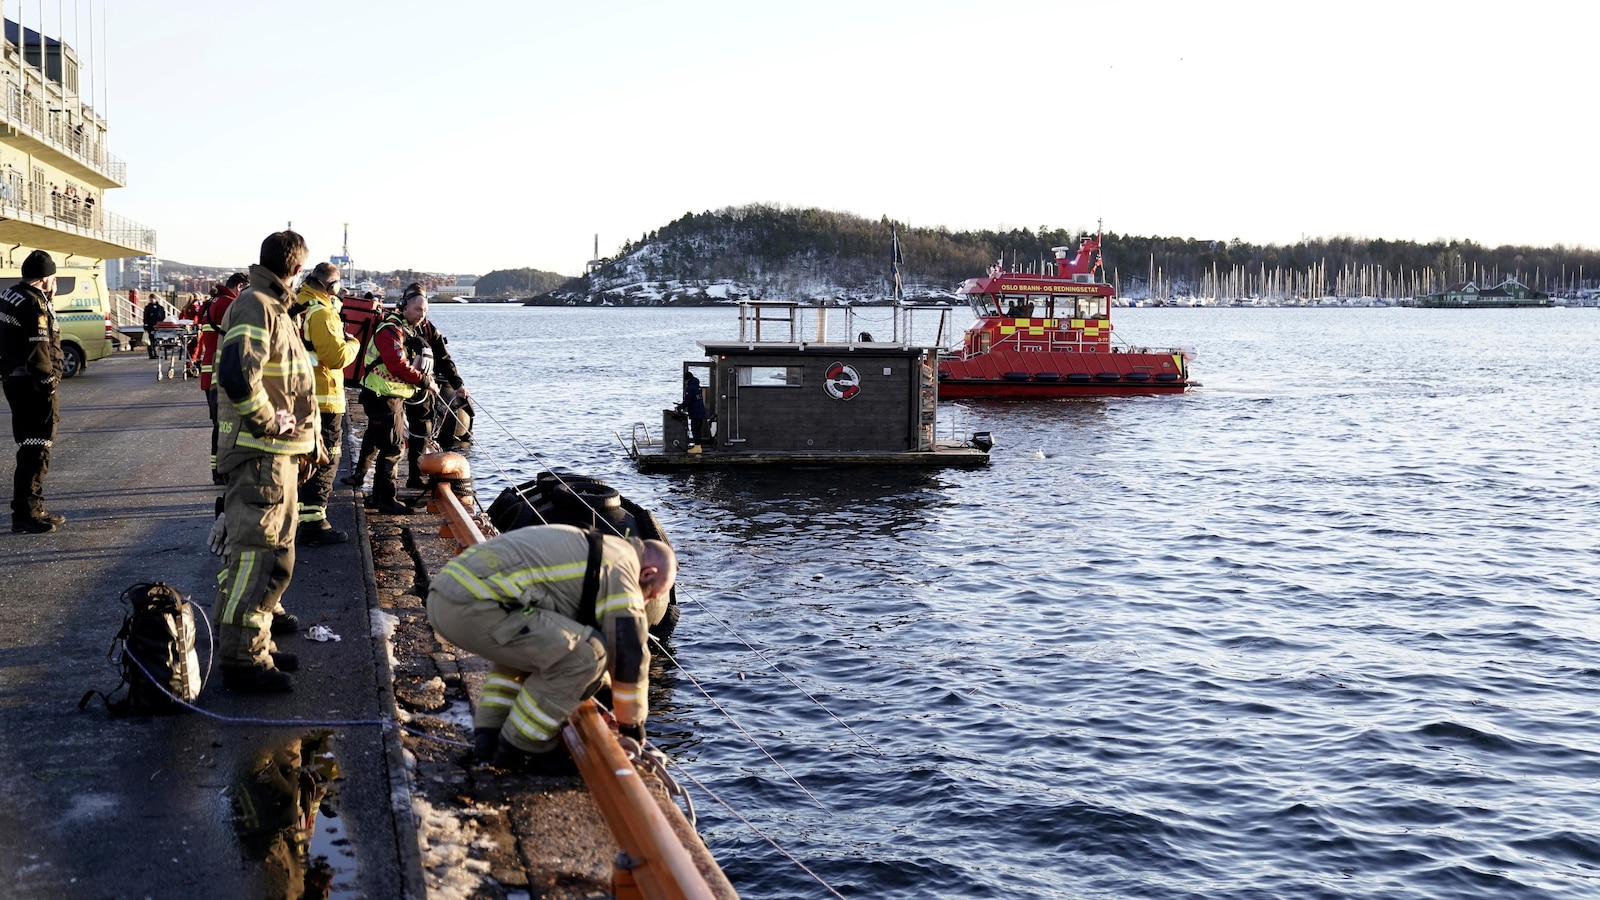 Sauna-goers in towels successfully rescue 2 individuals from submerged car